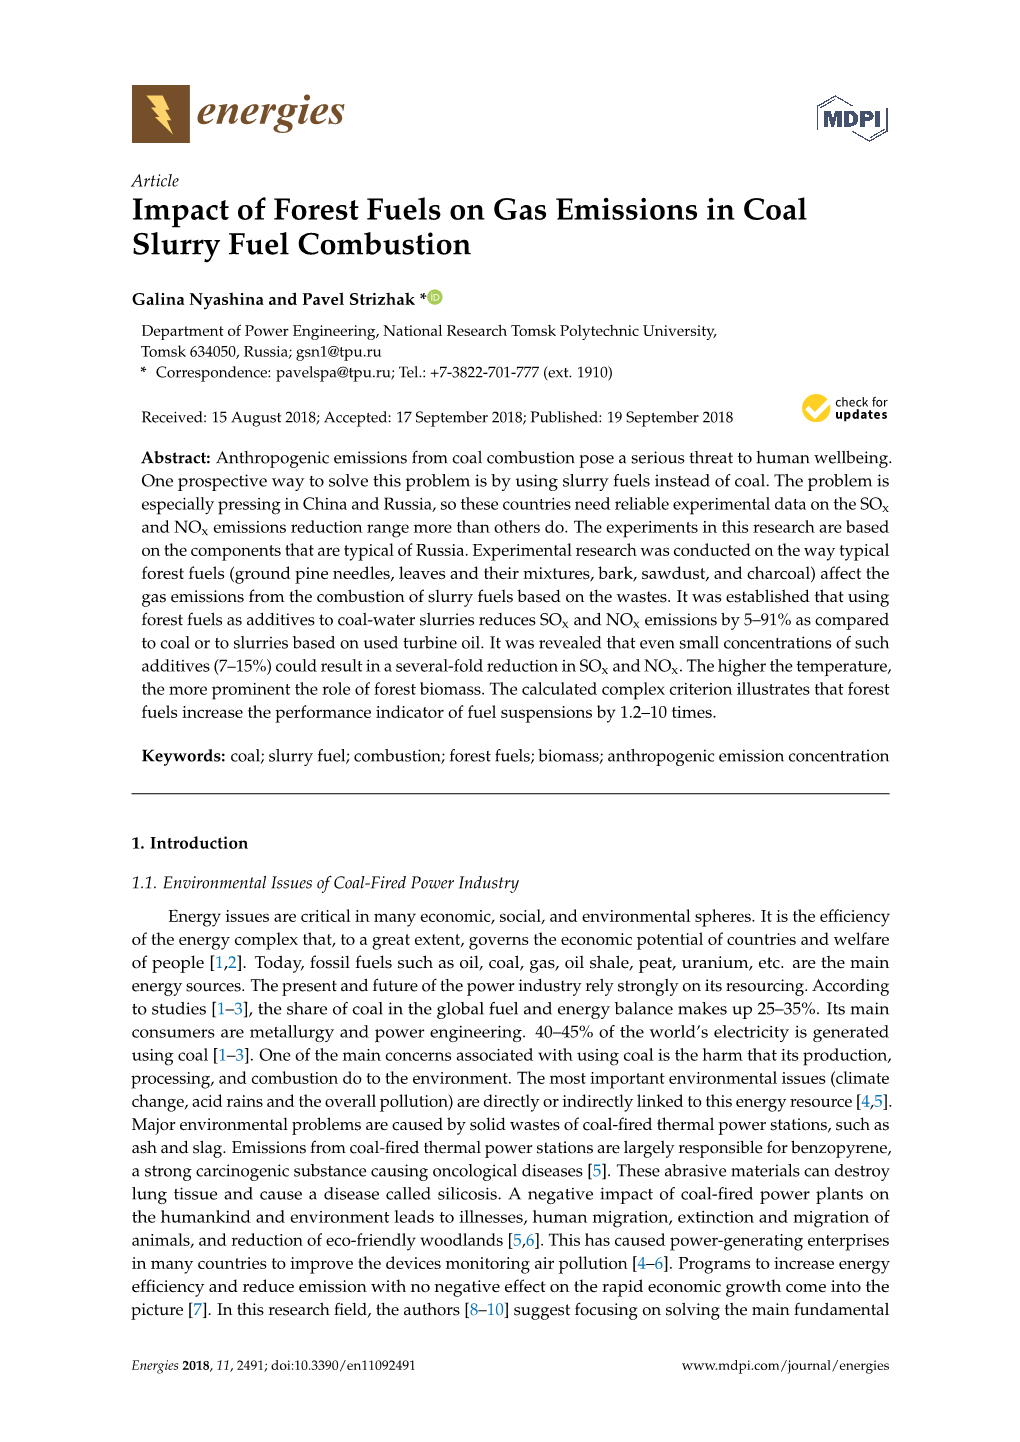 Impact of Forest Fuels on Gas Emissions in Coal Slurry Fuel Combustion